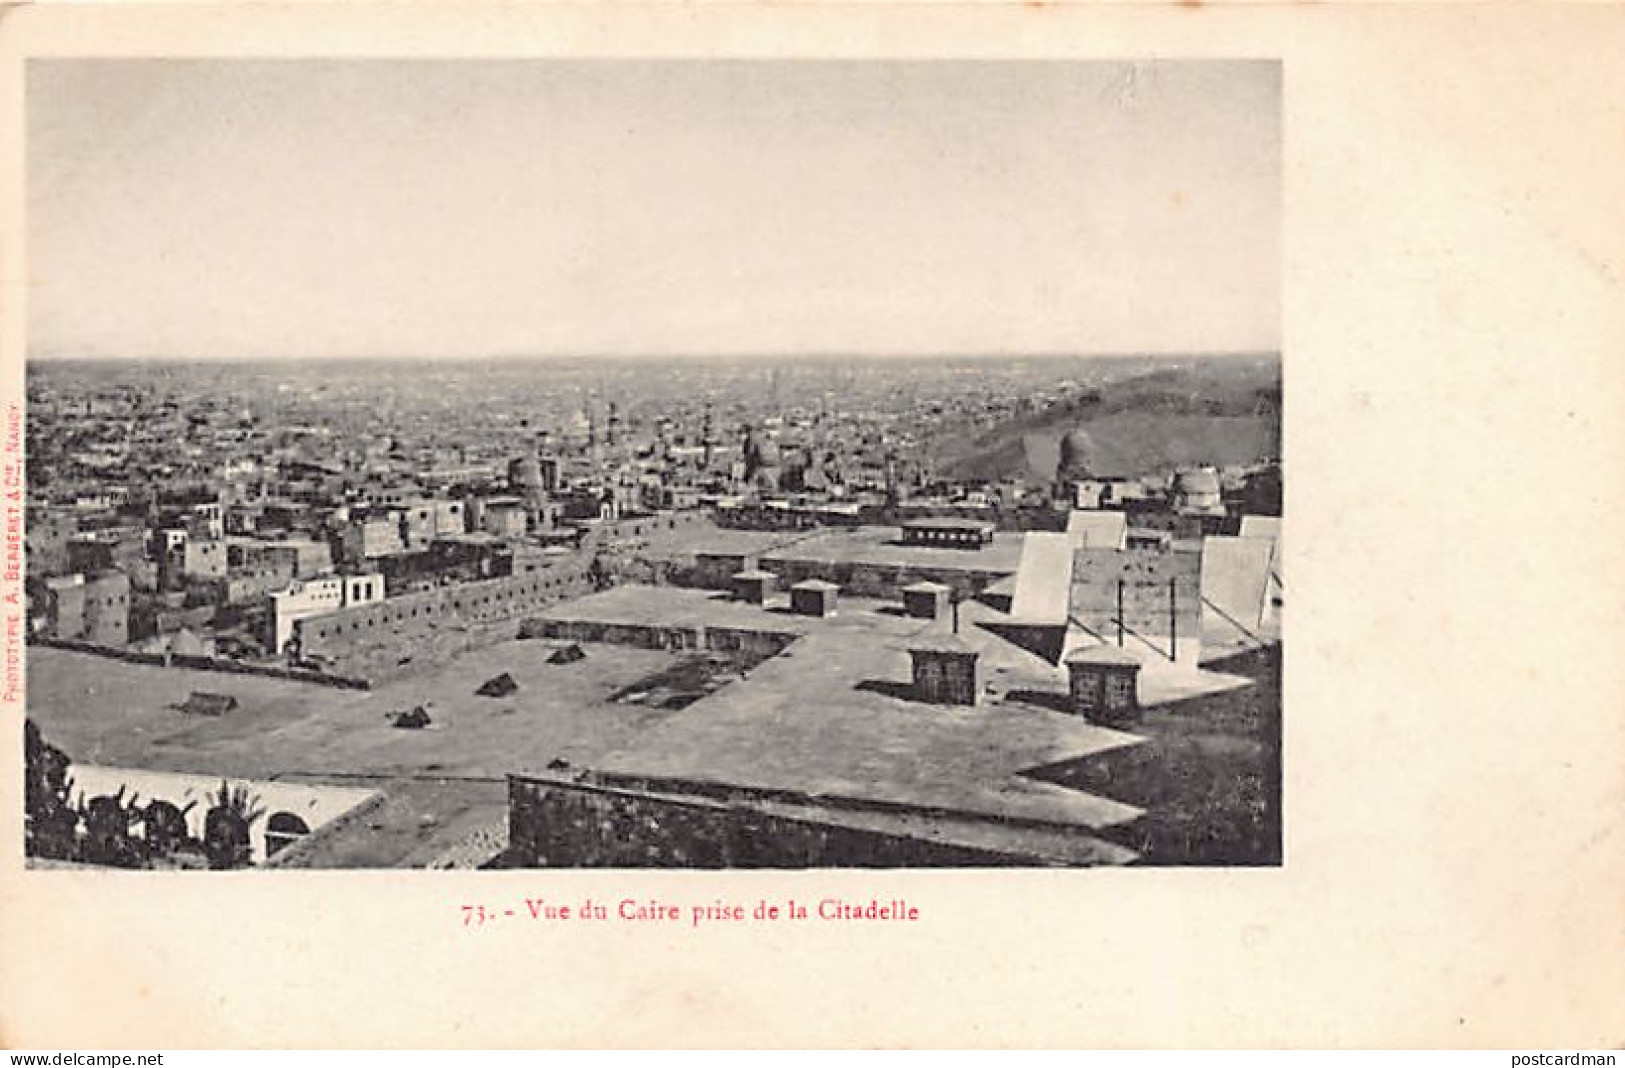 Egypt - CAIRO - Bird's Eye View From The Citadel - Publ. A. Bergeret & Cie.  - Cairo